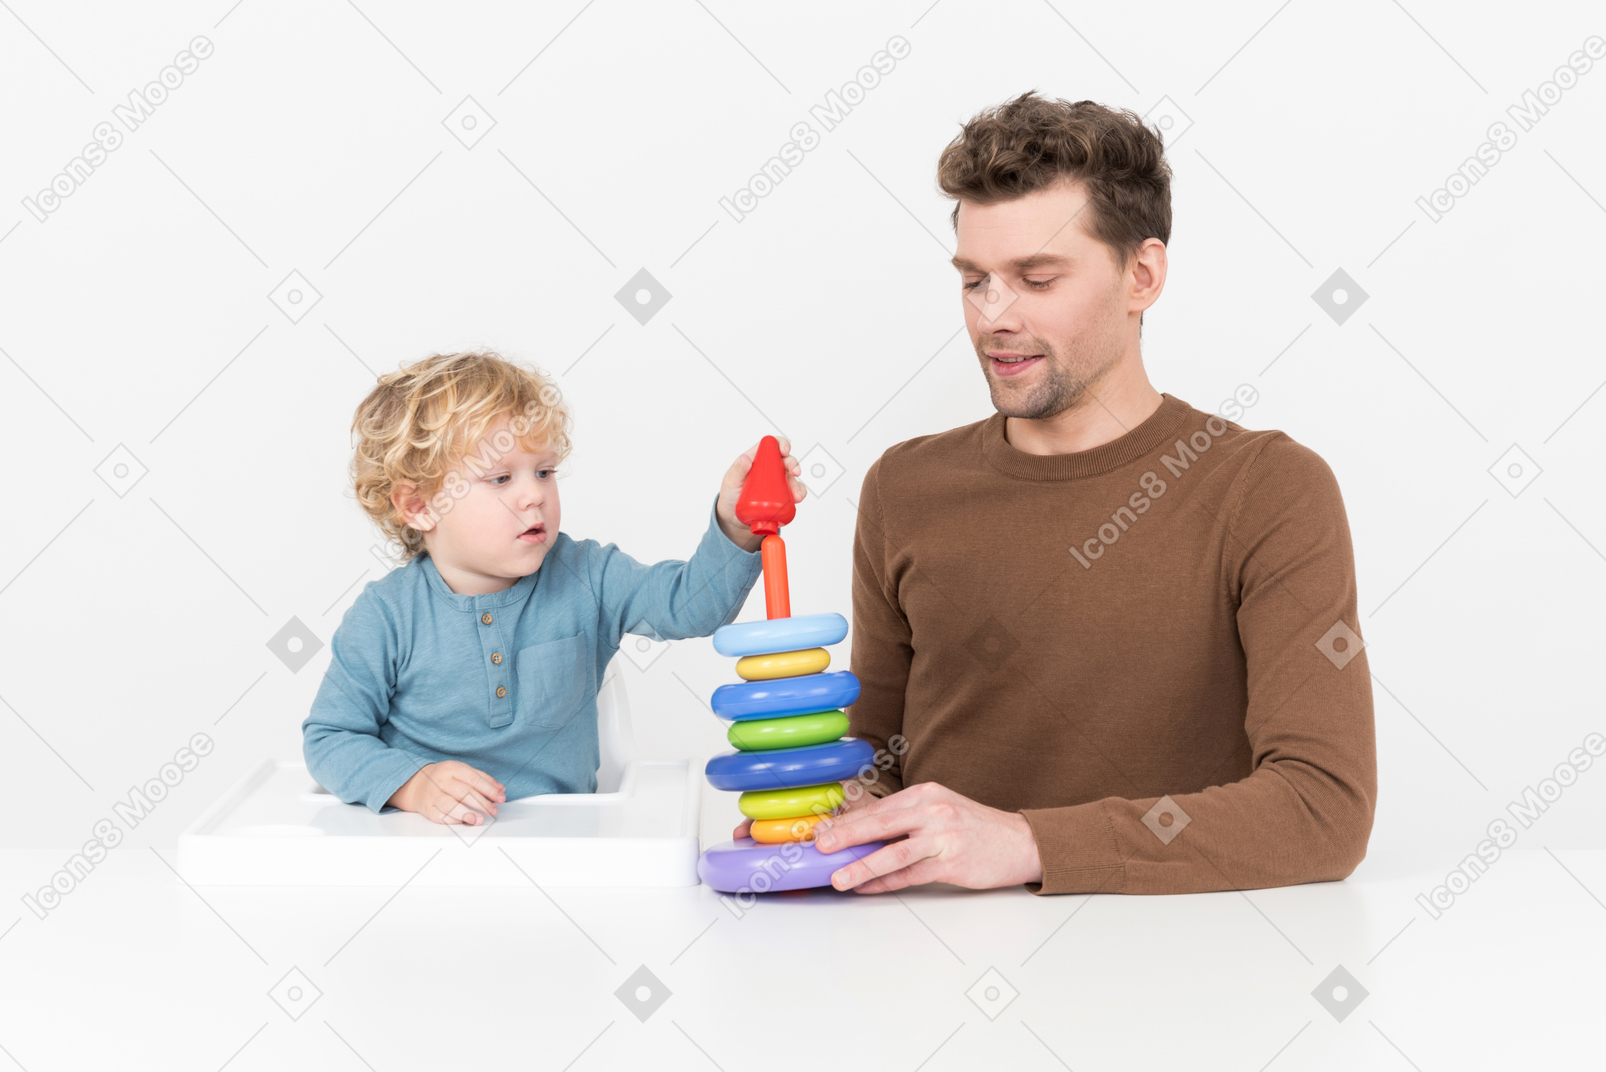 Father and son assembling a stacking toy